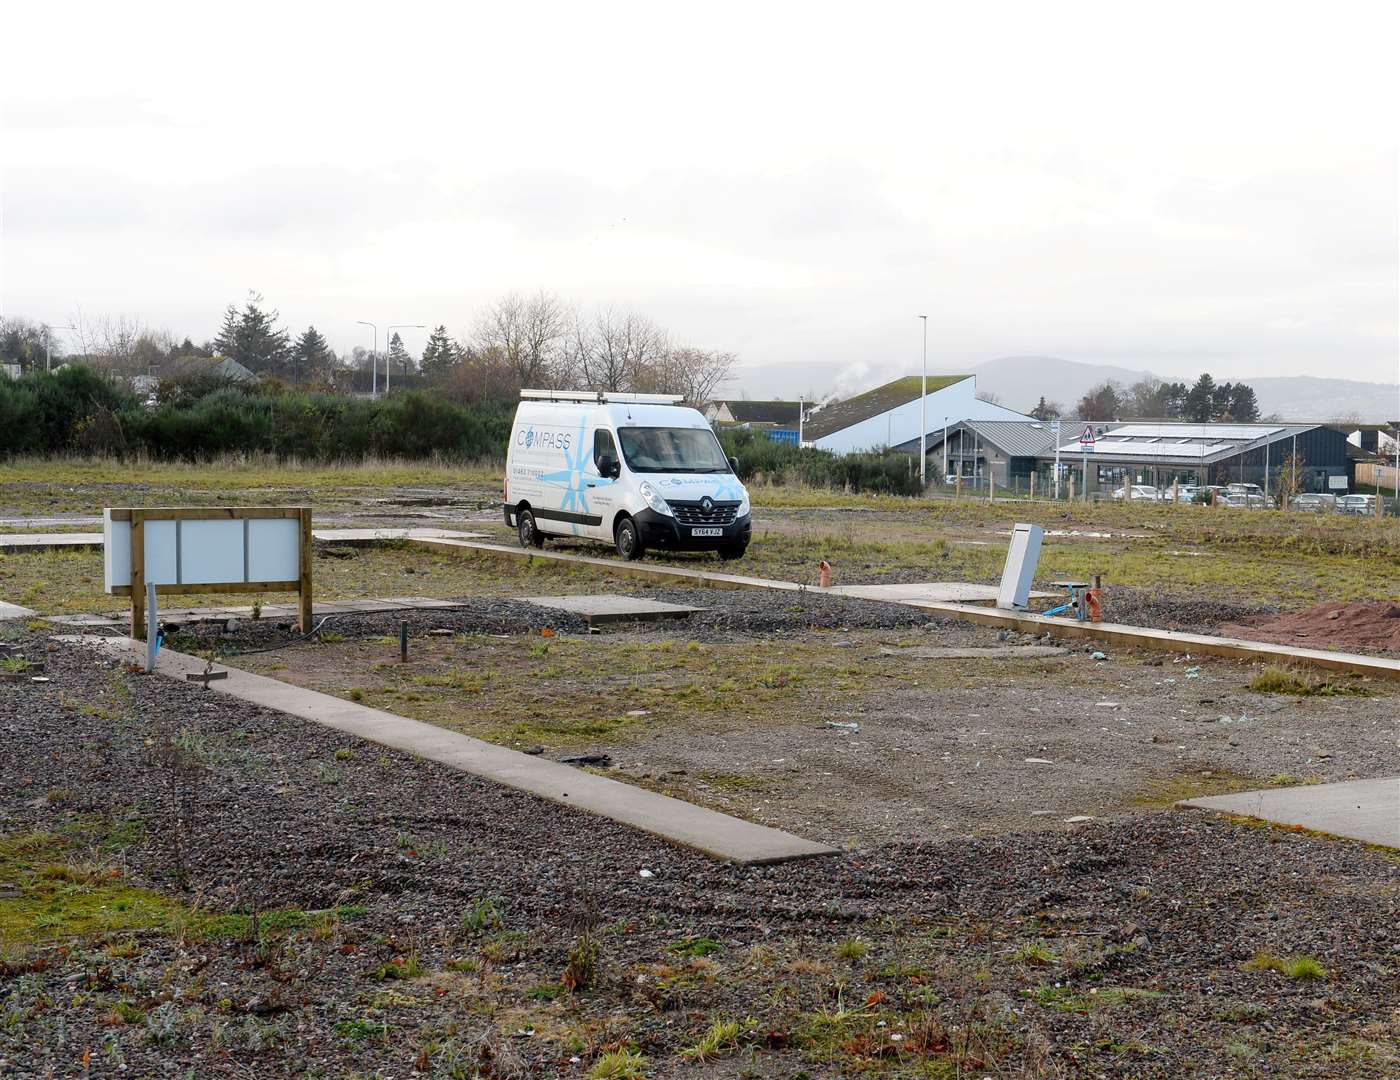 The Haven Centre is being built at a site in Smithton previously occupied by Culloden Court Care Home which was destroyed by a blaze in 2010.